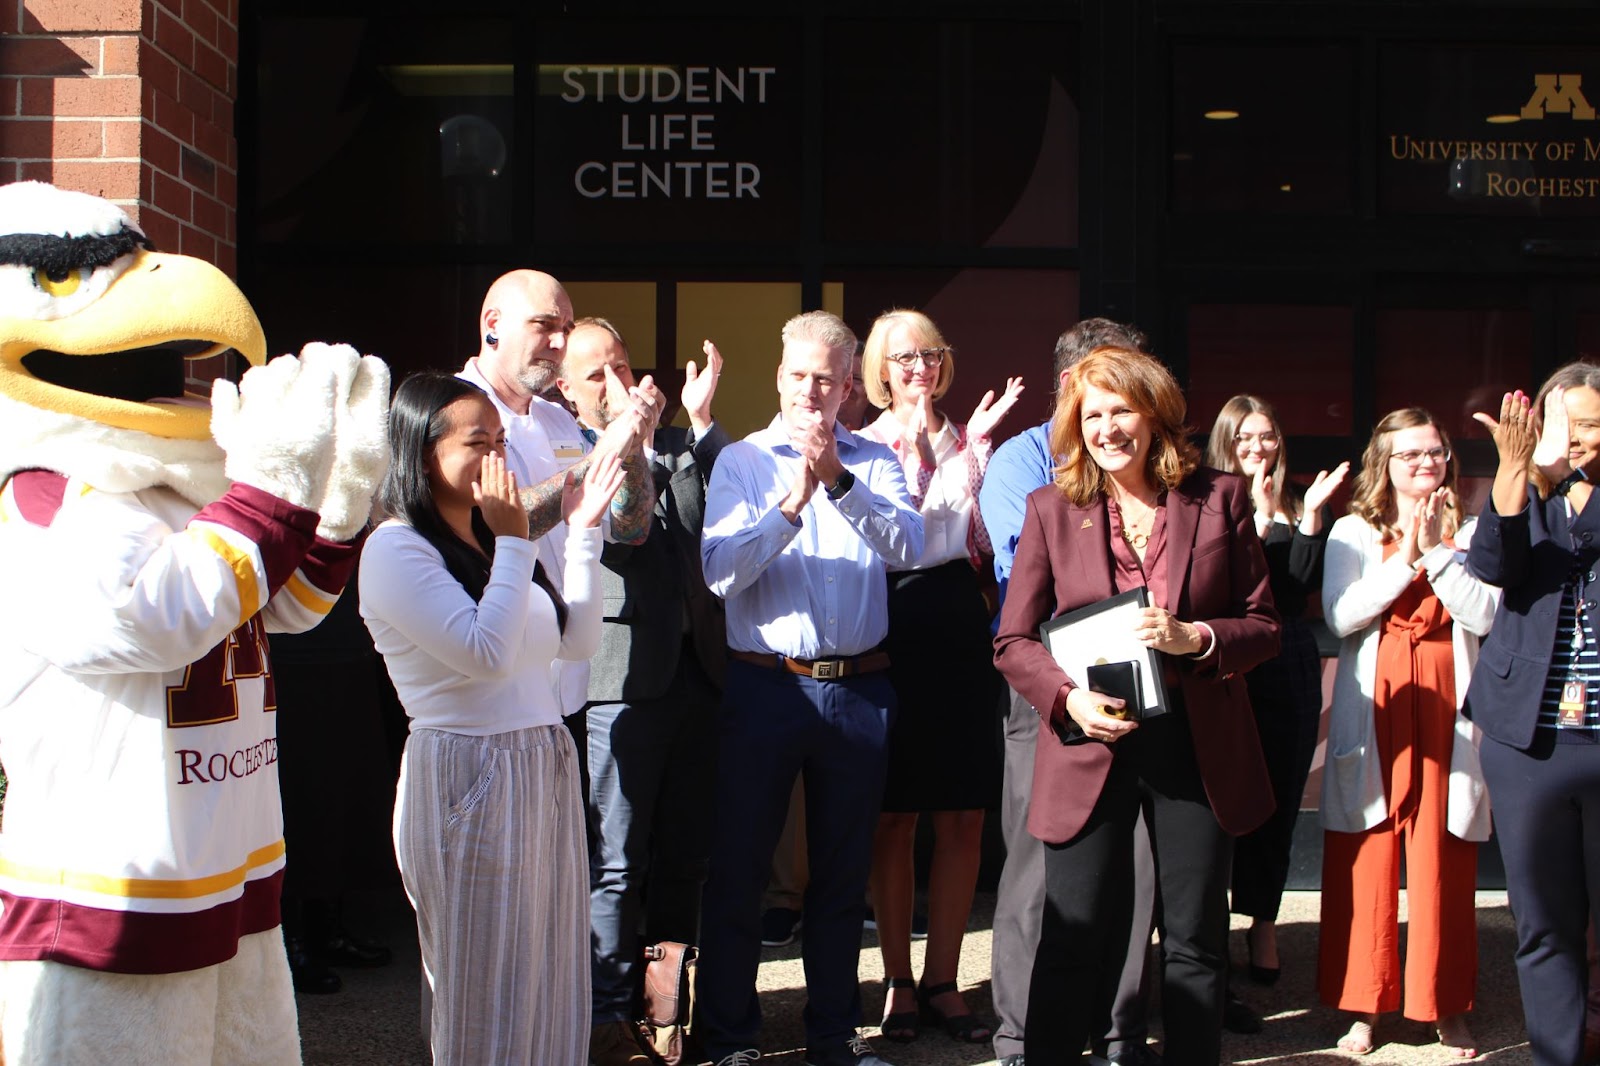 Chancellor Carrell speaking to audience in front of Student Life Center after ribbon cutting. 